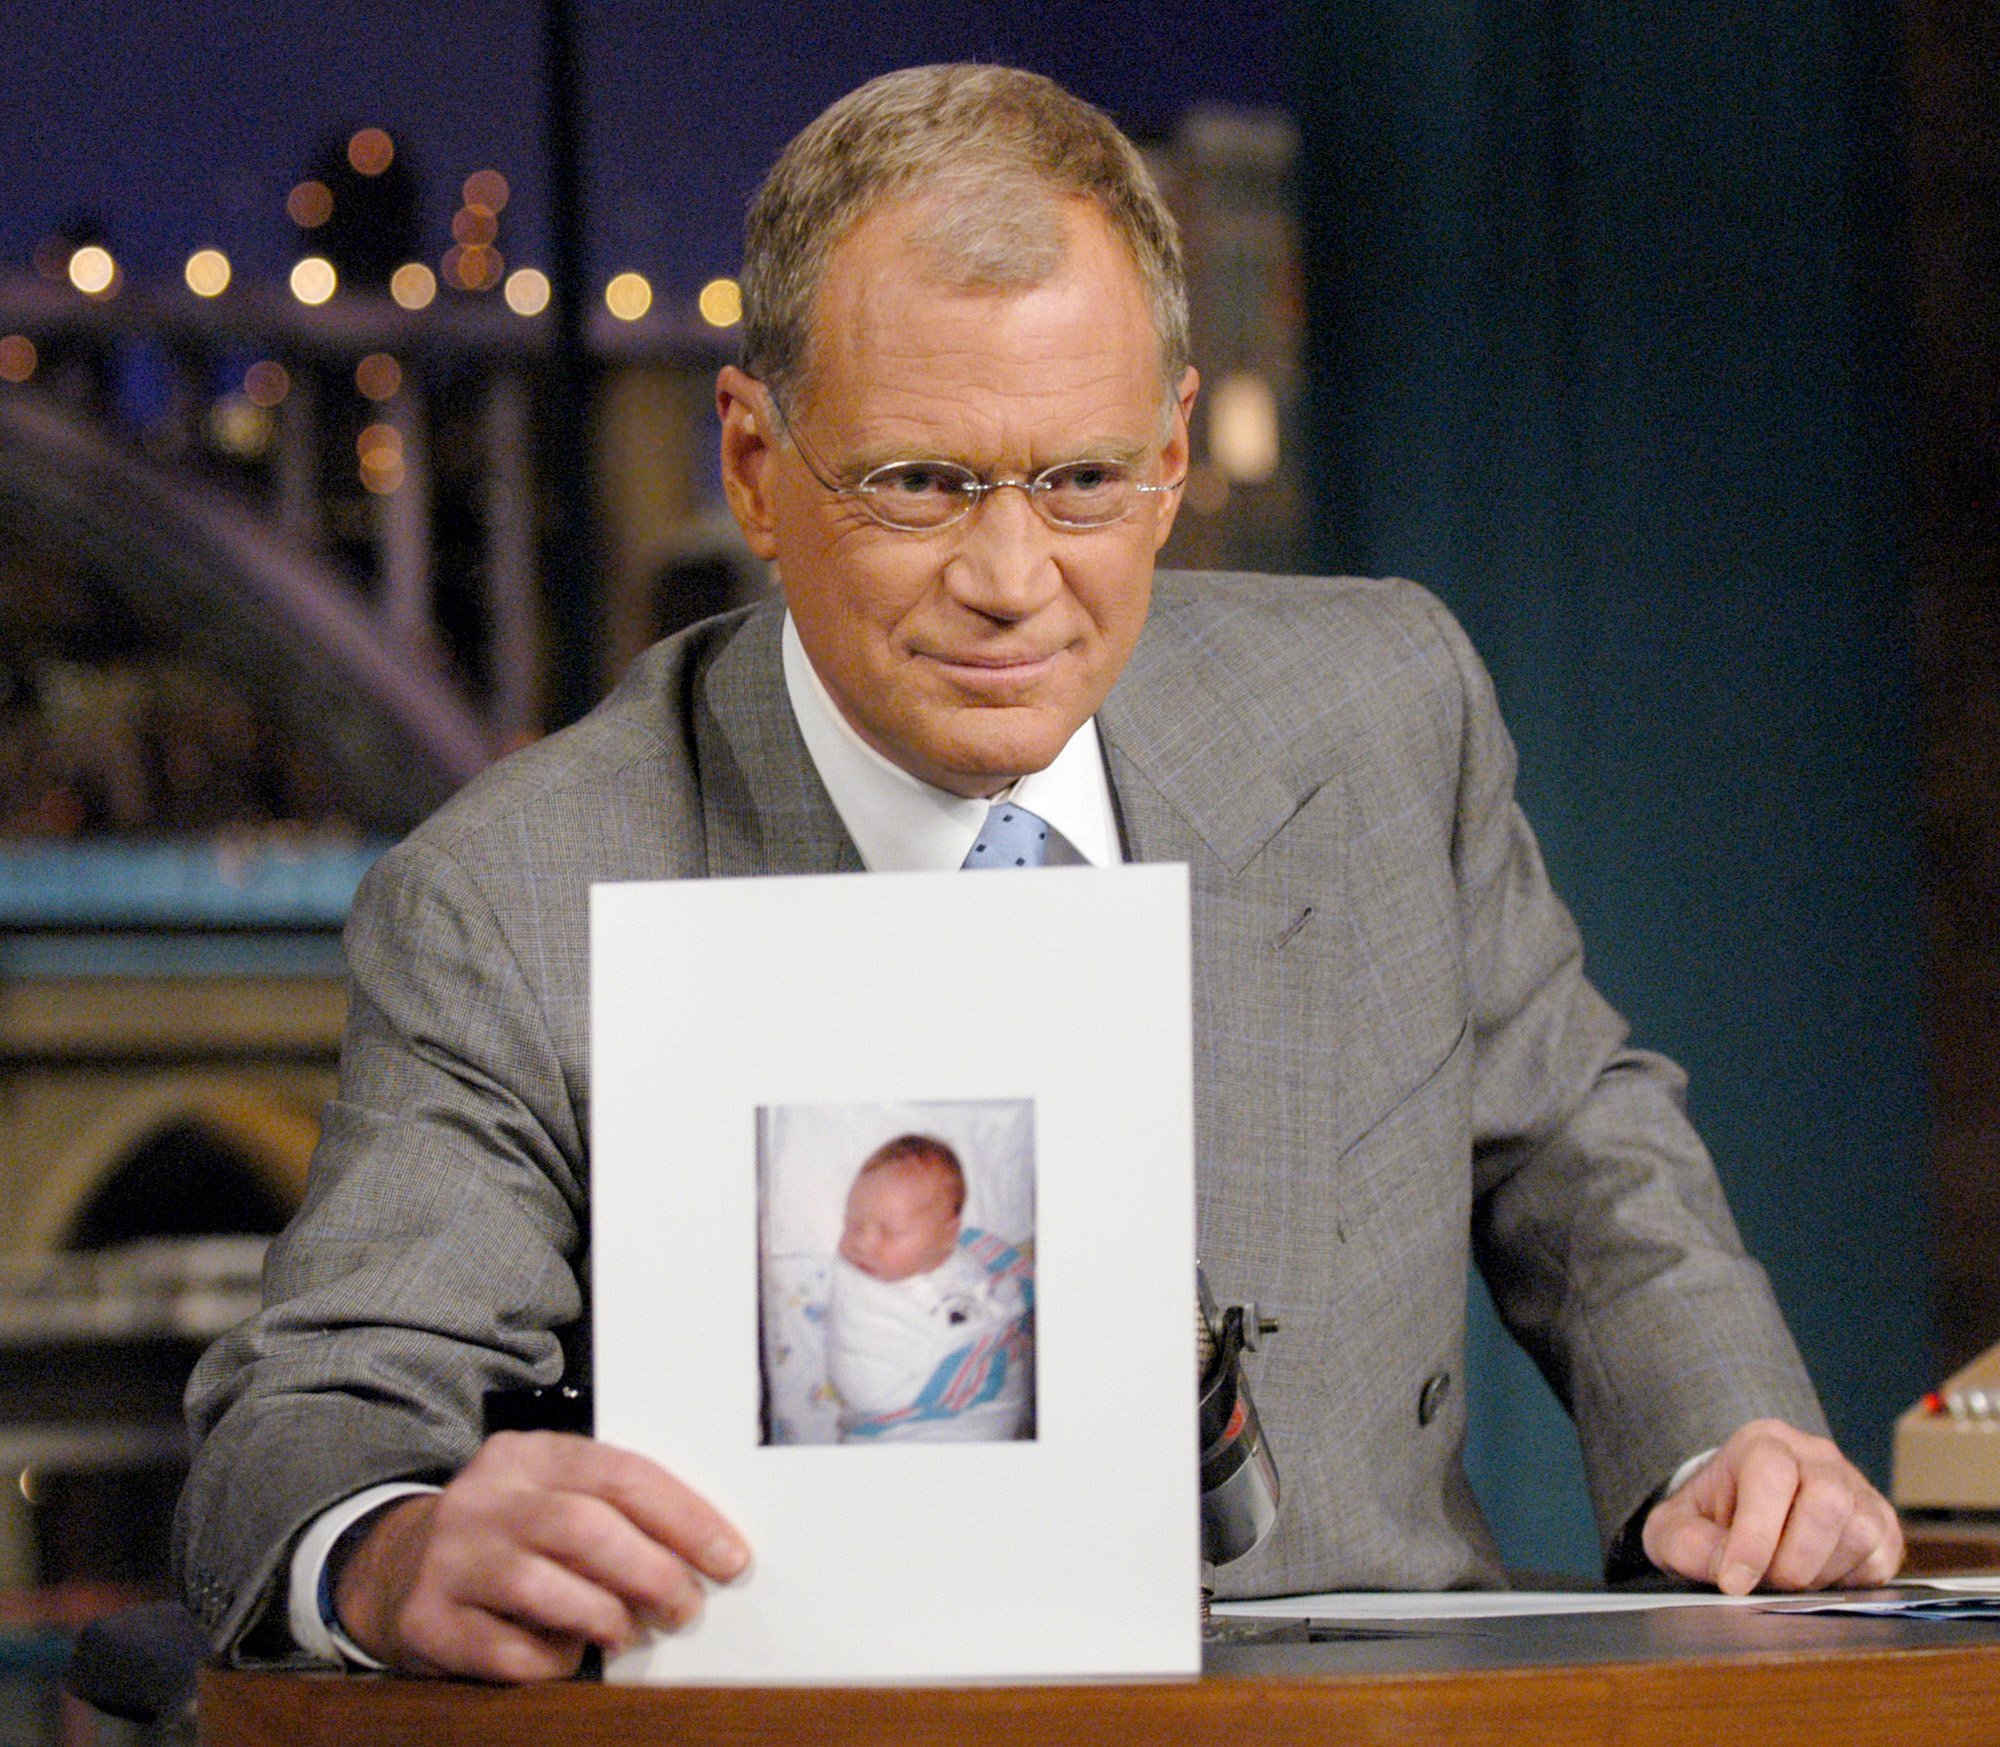 David Letterman holds a photo of his new son, Harry Joseph Letterman on 'The Late Show with David Letterman' on November 4, 2003 on the CBS Television Network. I Source: Getty Images 